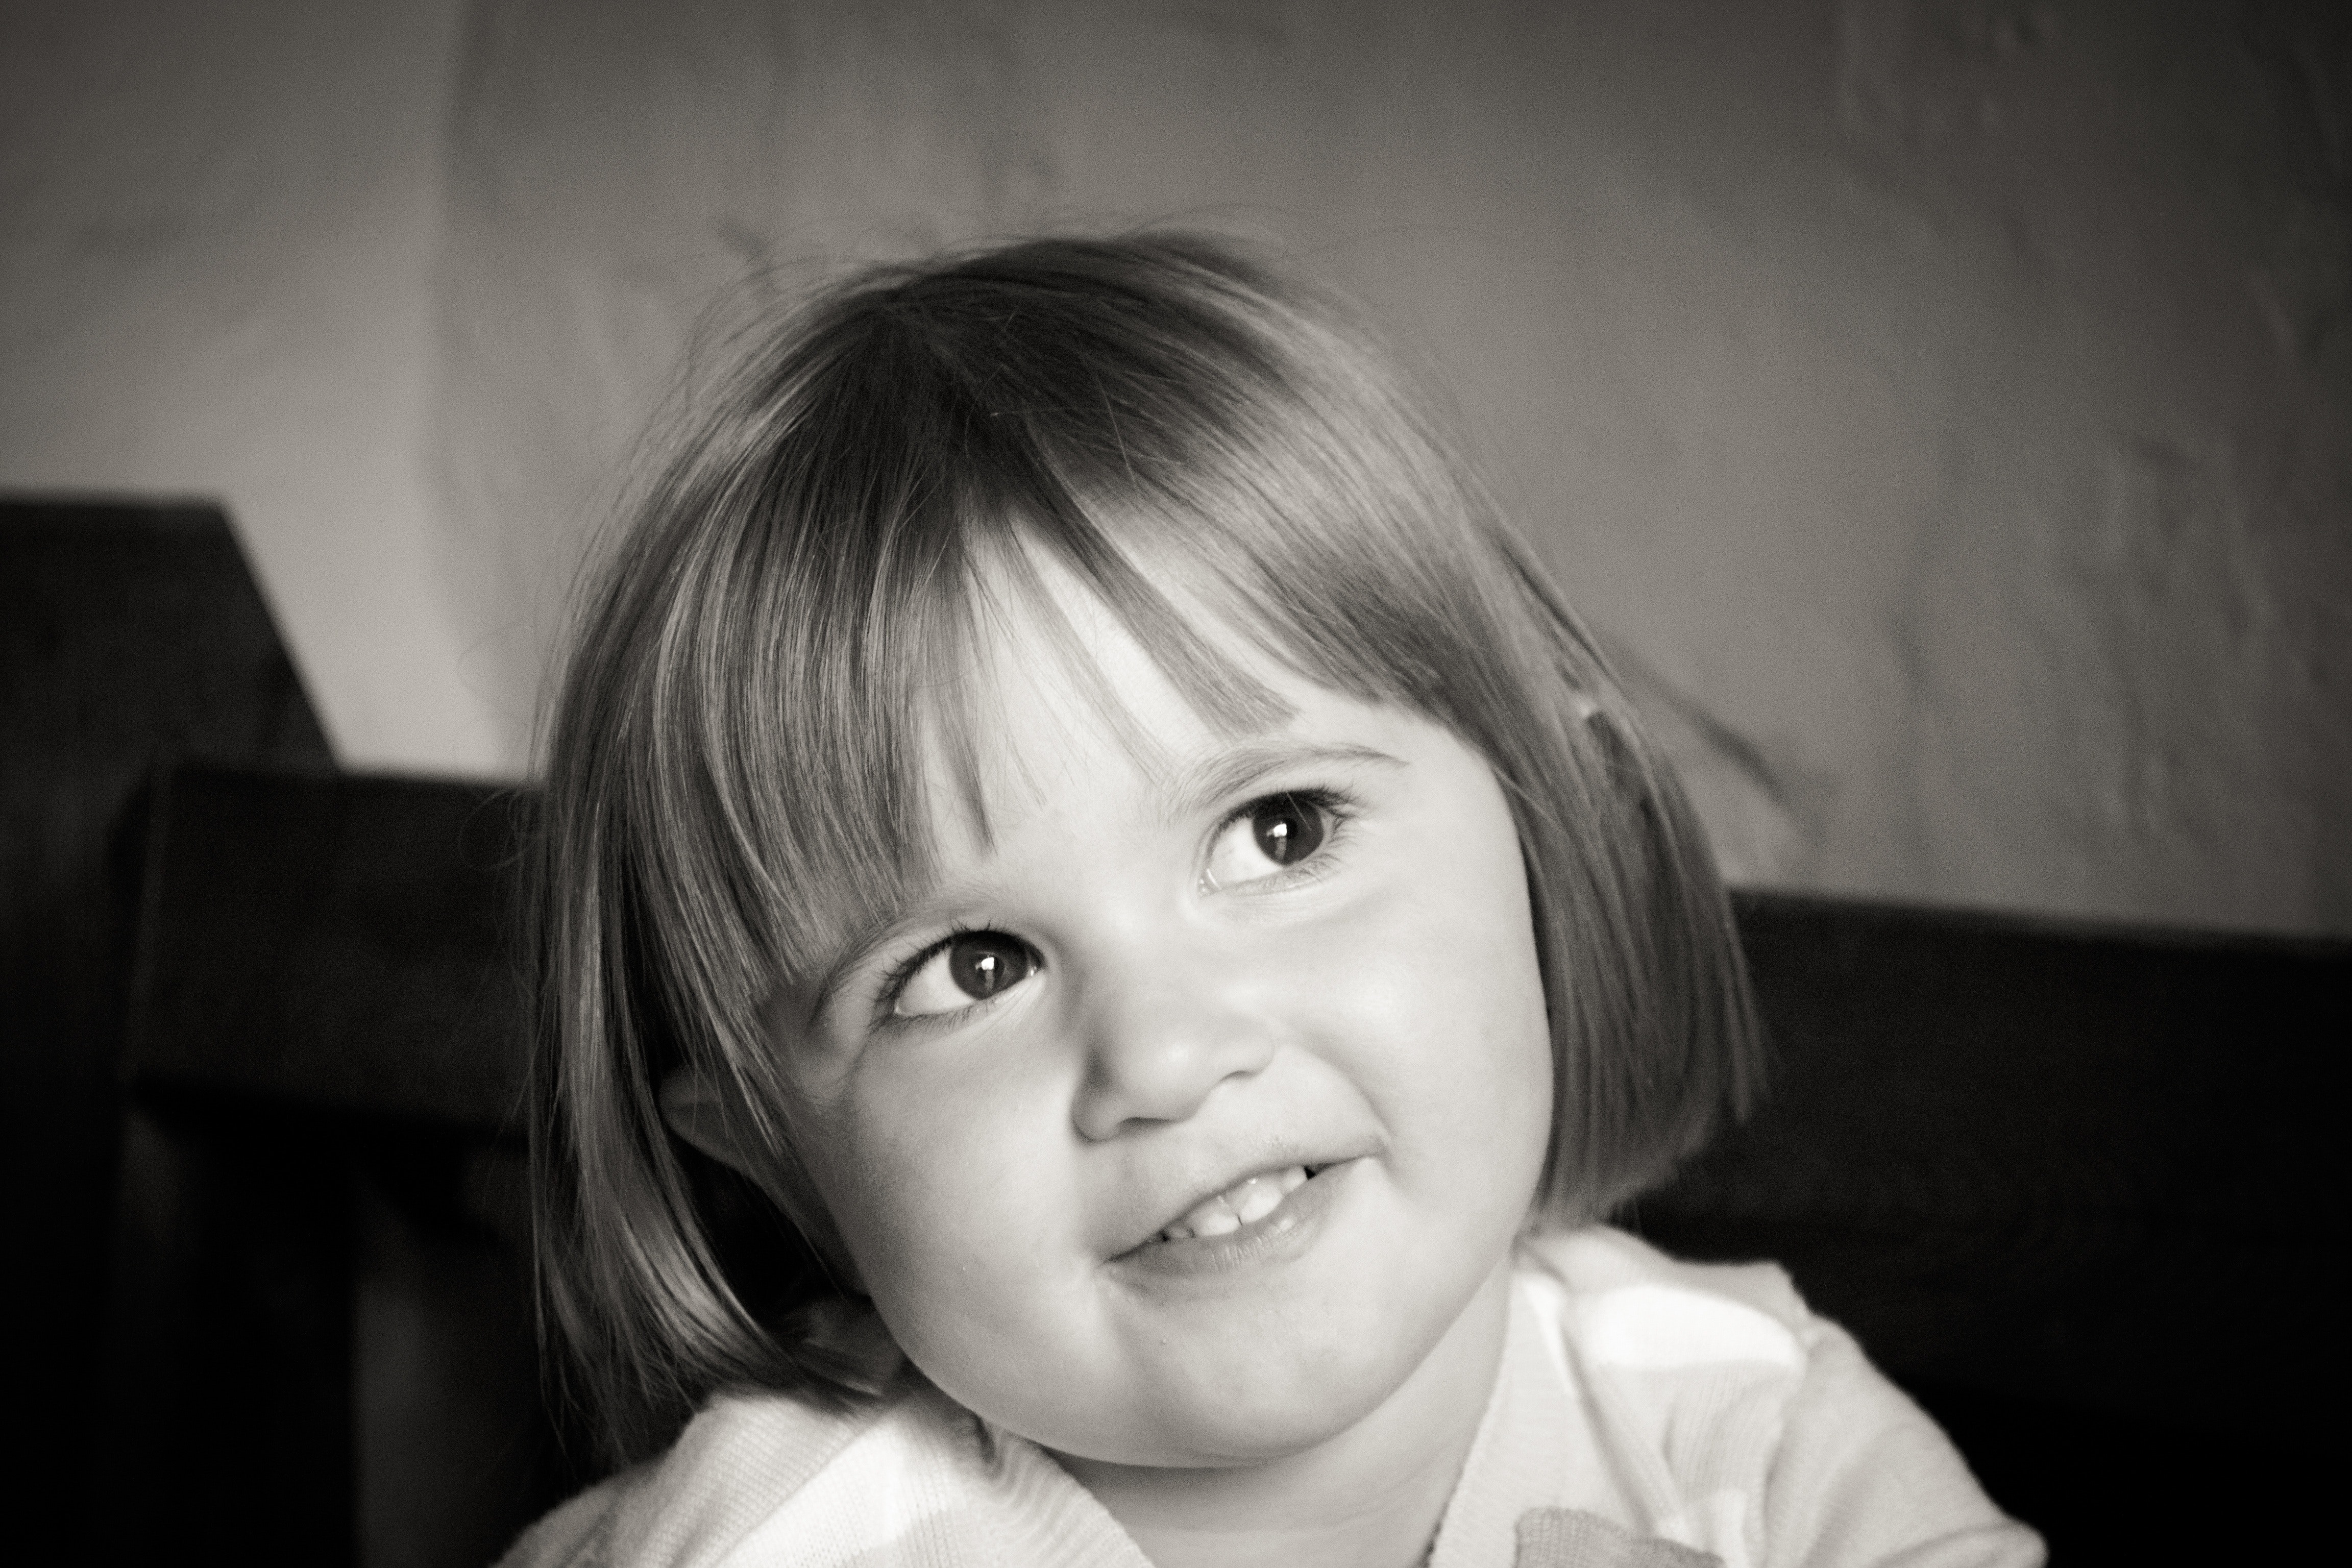 Portrait of Smiling Girl With Short Hair in Grayscale Photography, Baby, Little, Young, Toddler, HQ Photo